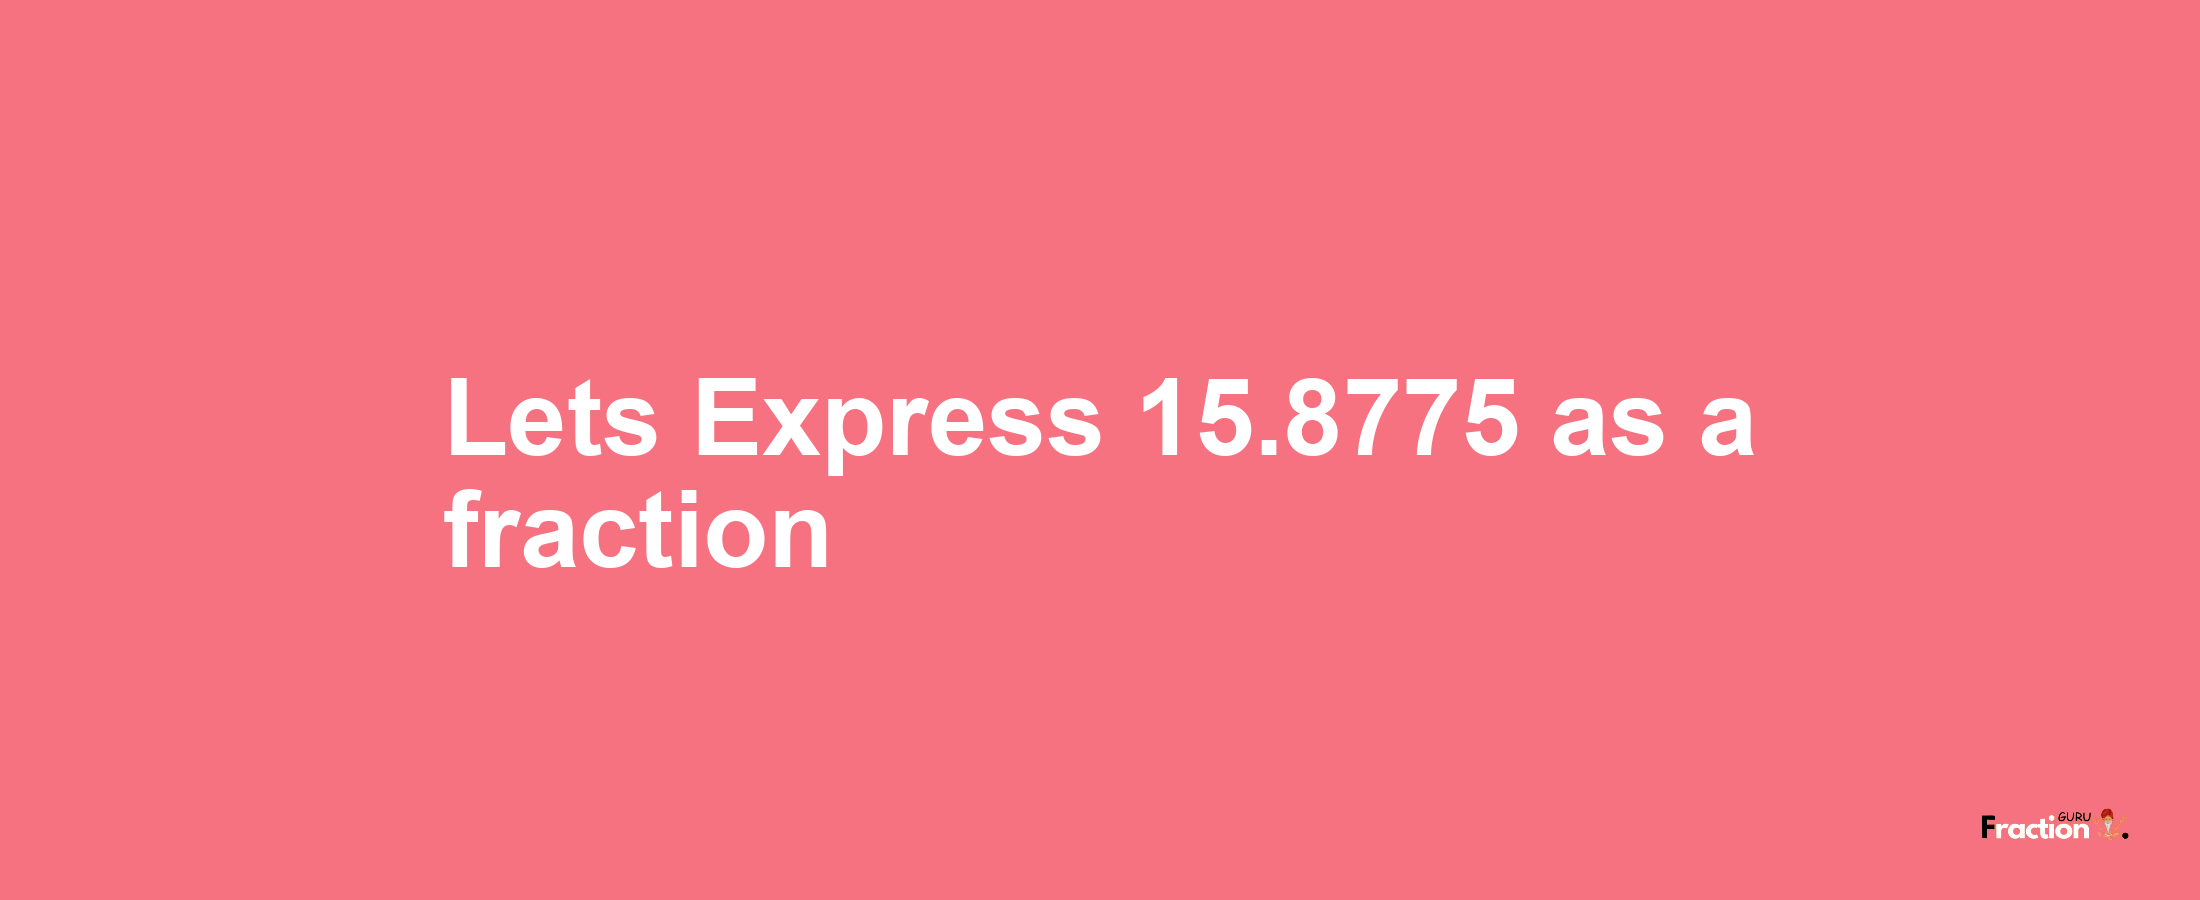 Lets Express 15.8775 as afraction